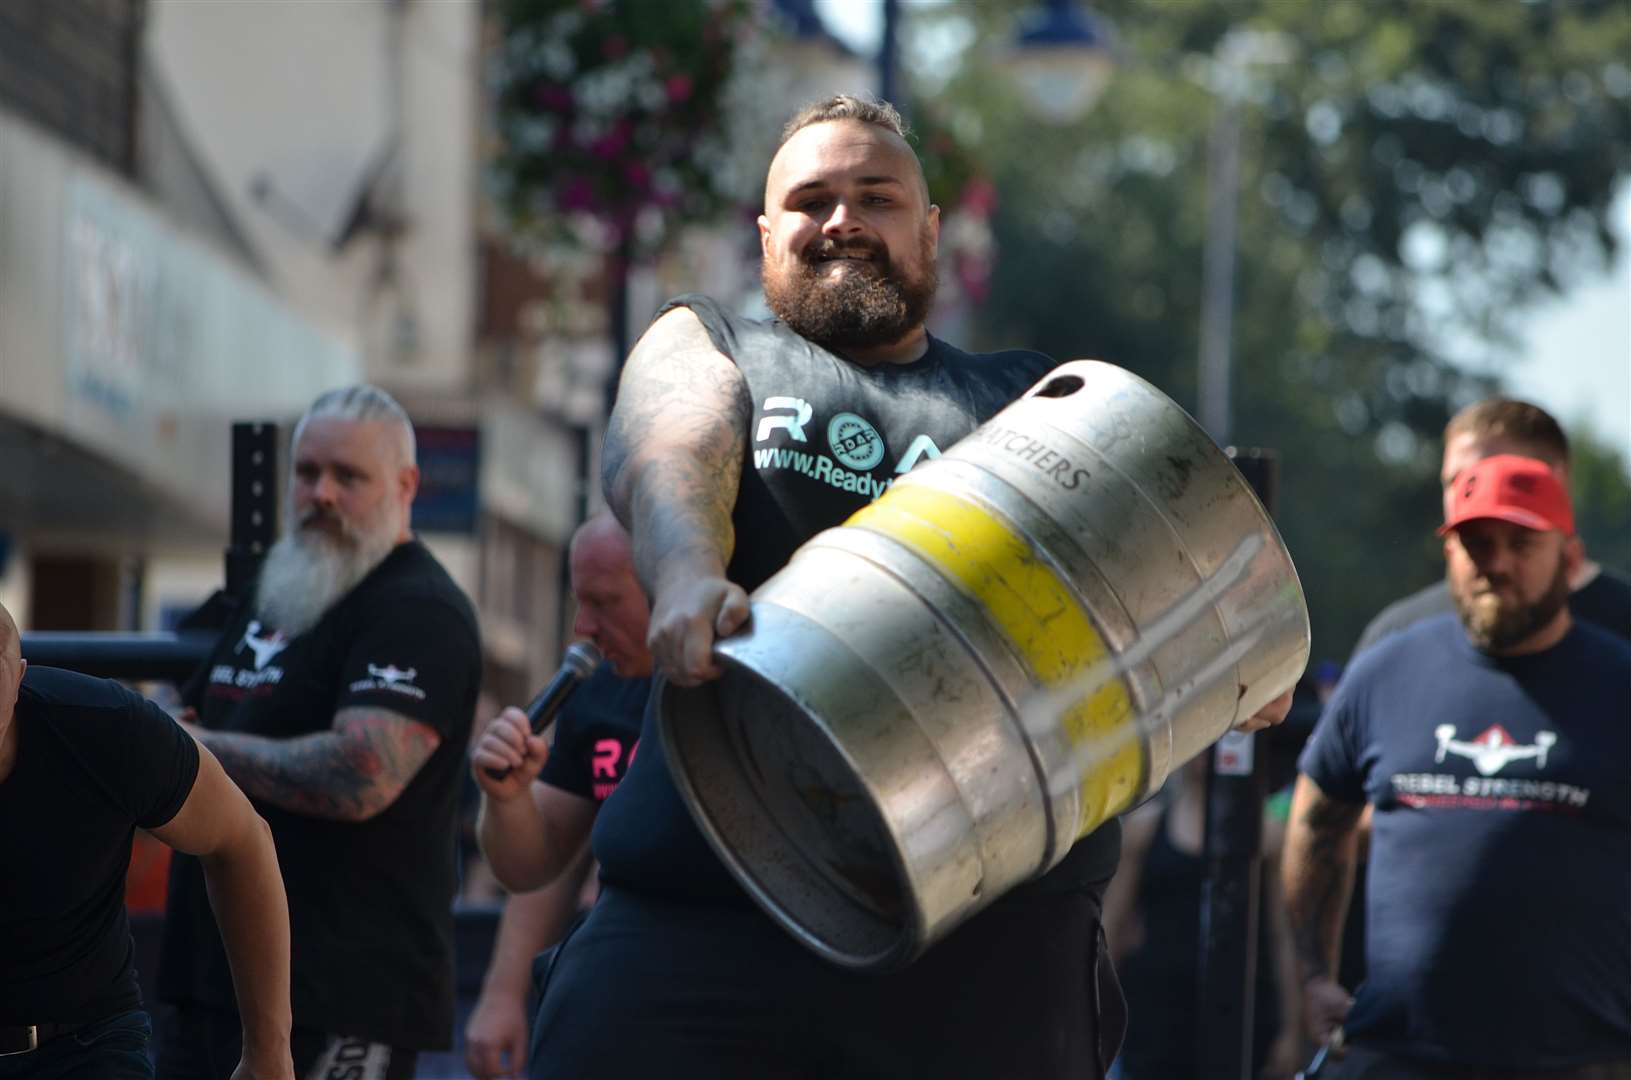 Action from the South East's Strongest Man event in Gravesend in 2018. Picture: @jasonphoto